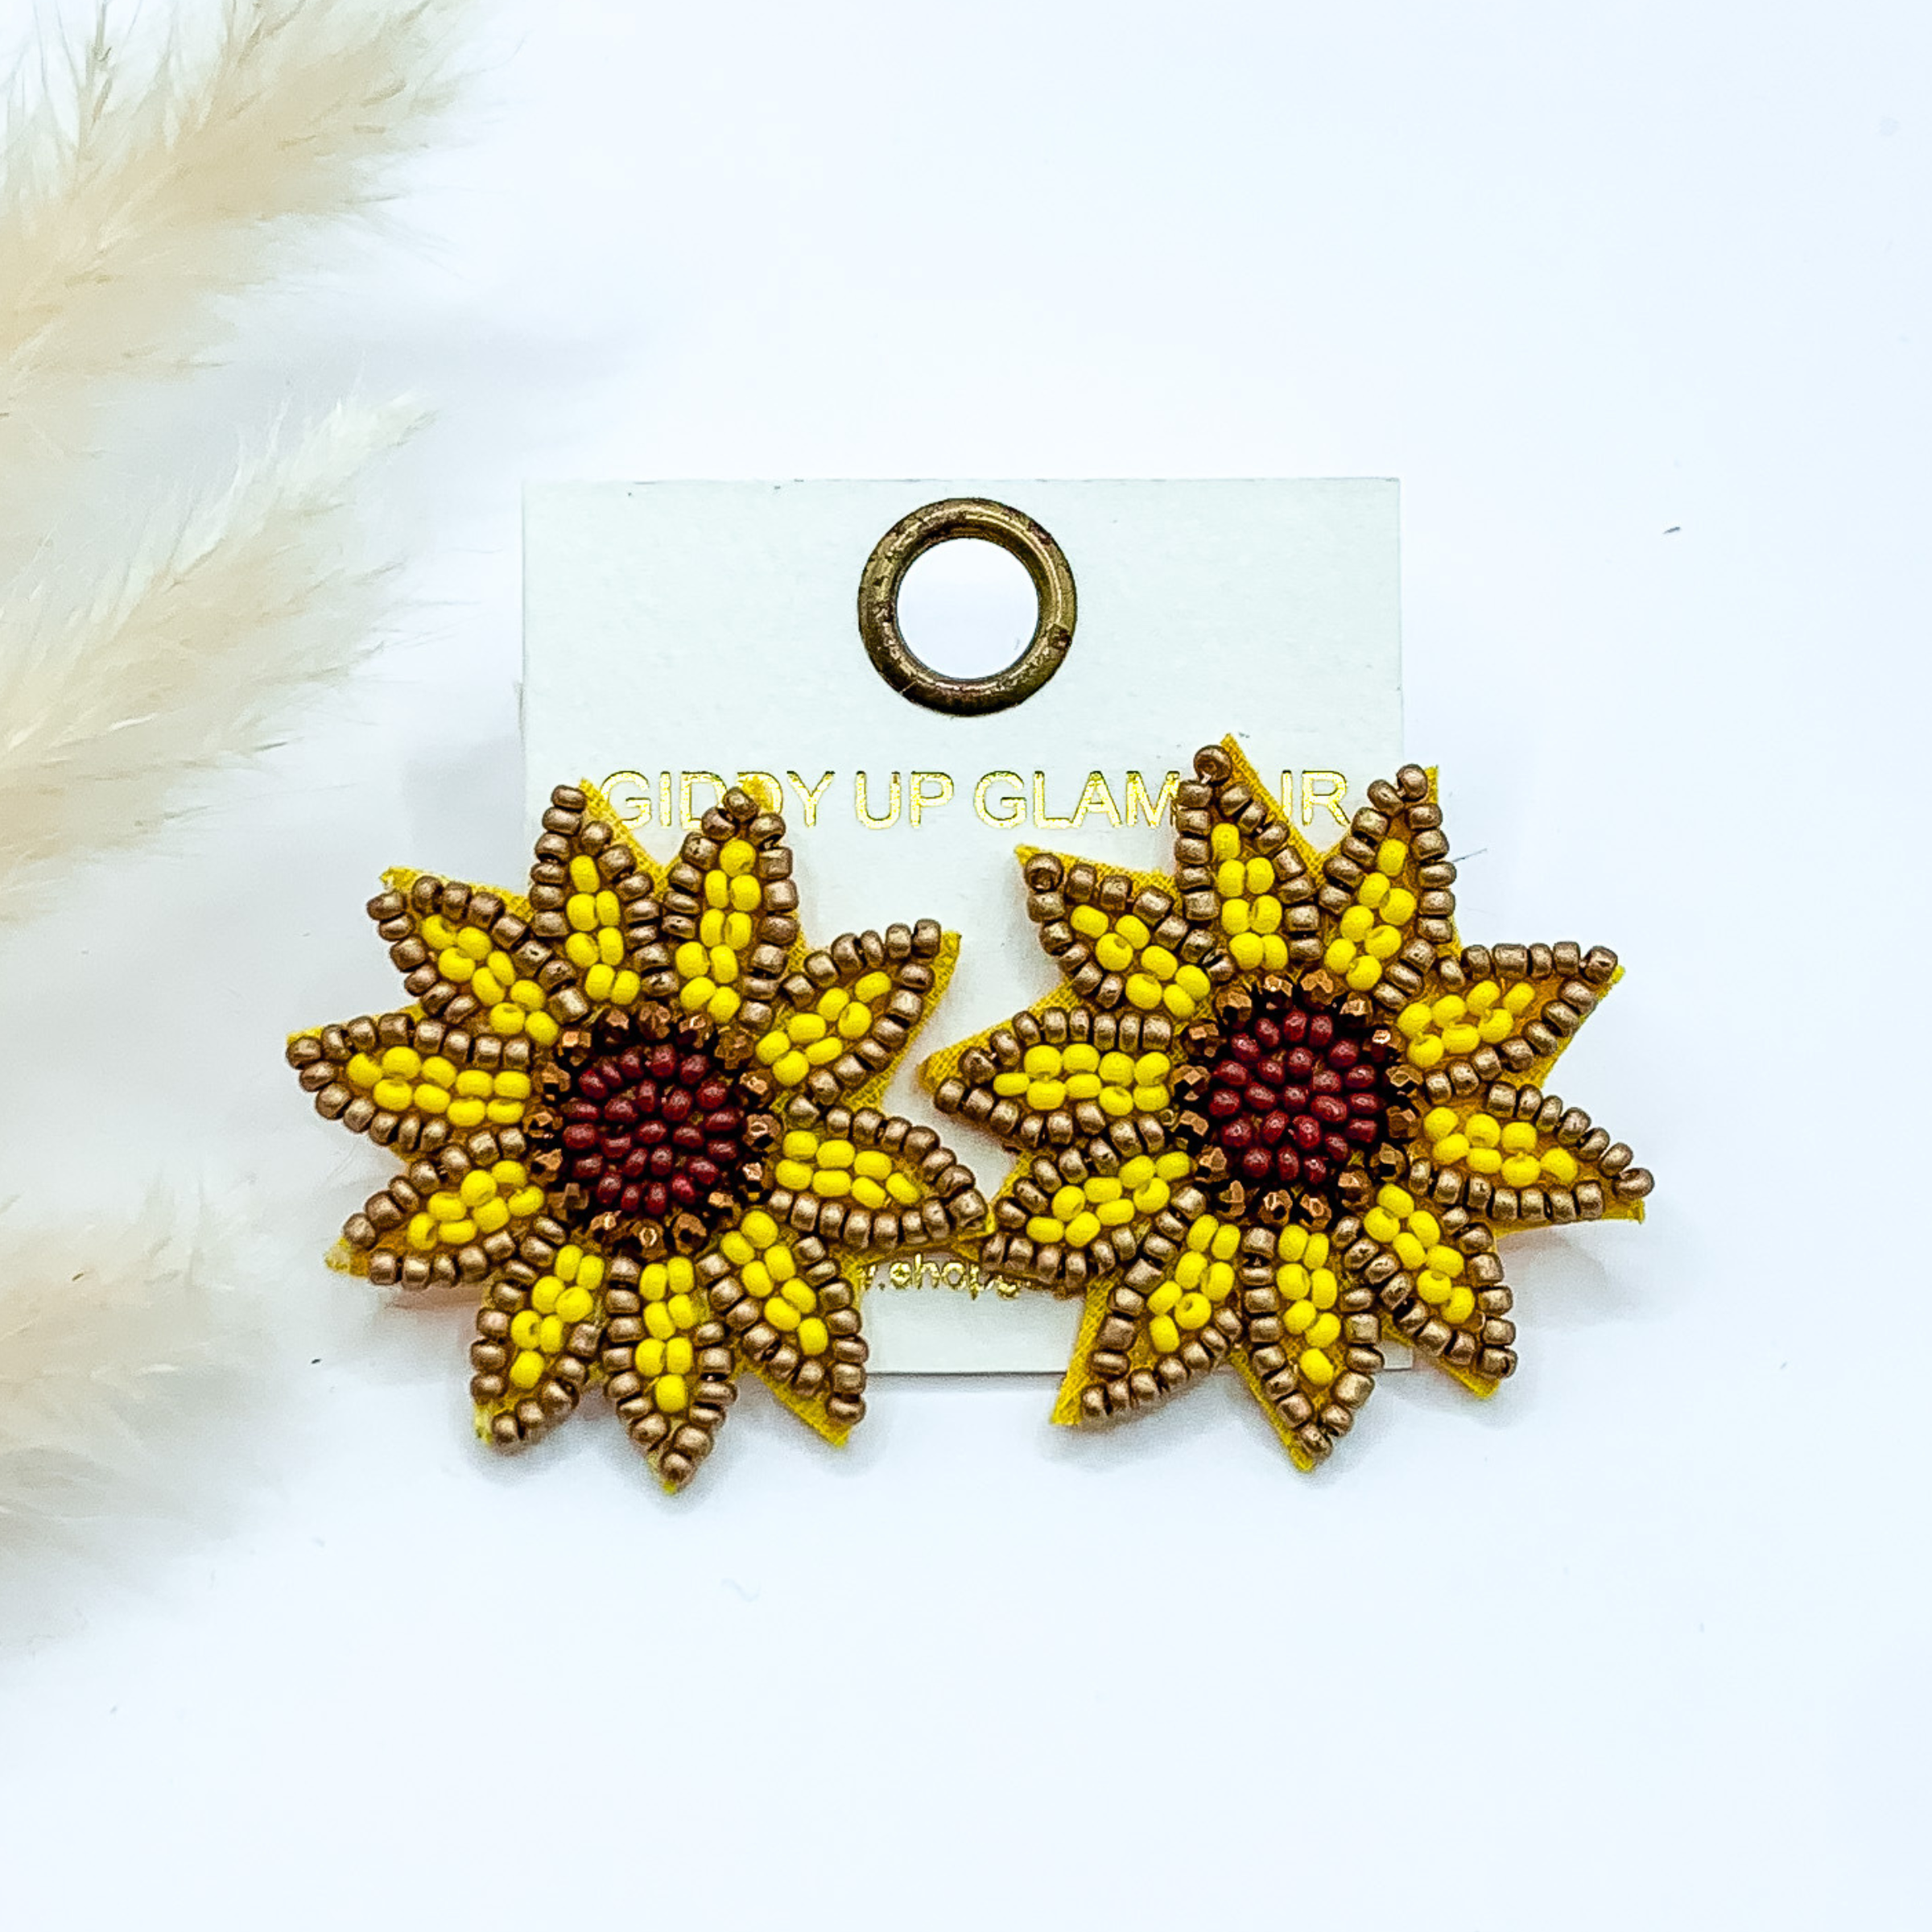 Beaded sunflower stud earrings. These earrings include yellow, gold, and brown beads. These earrings are pictured on a white background. 